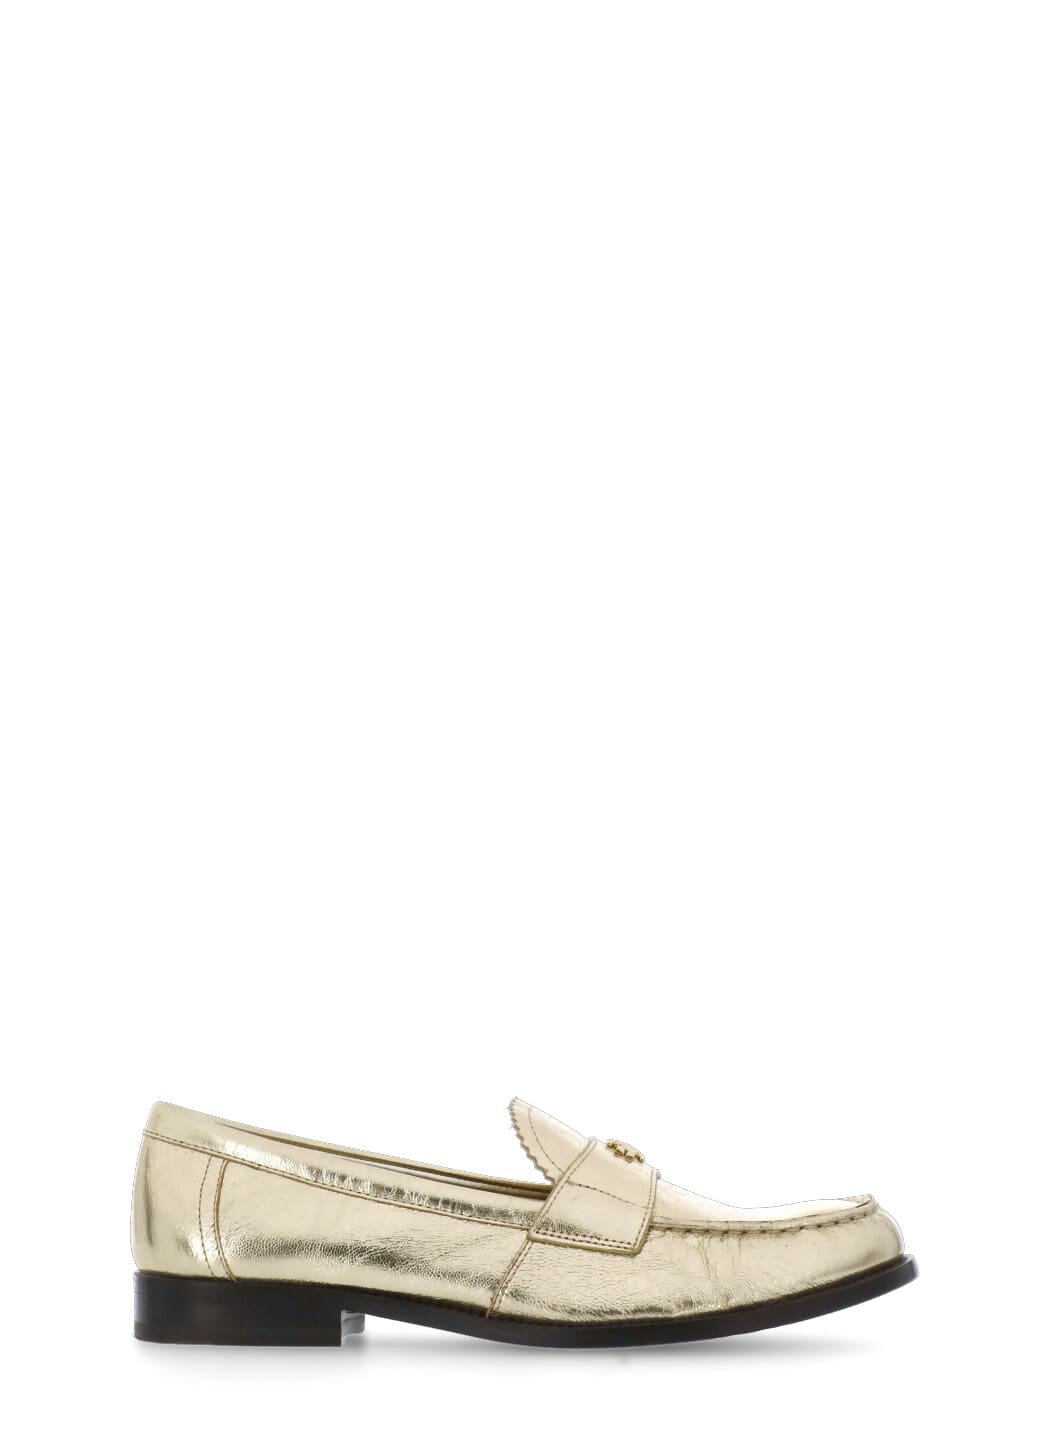 TORY BURCH LEATHER LOAFER